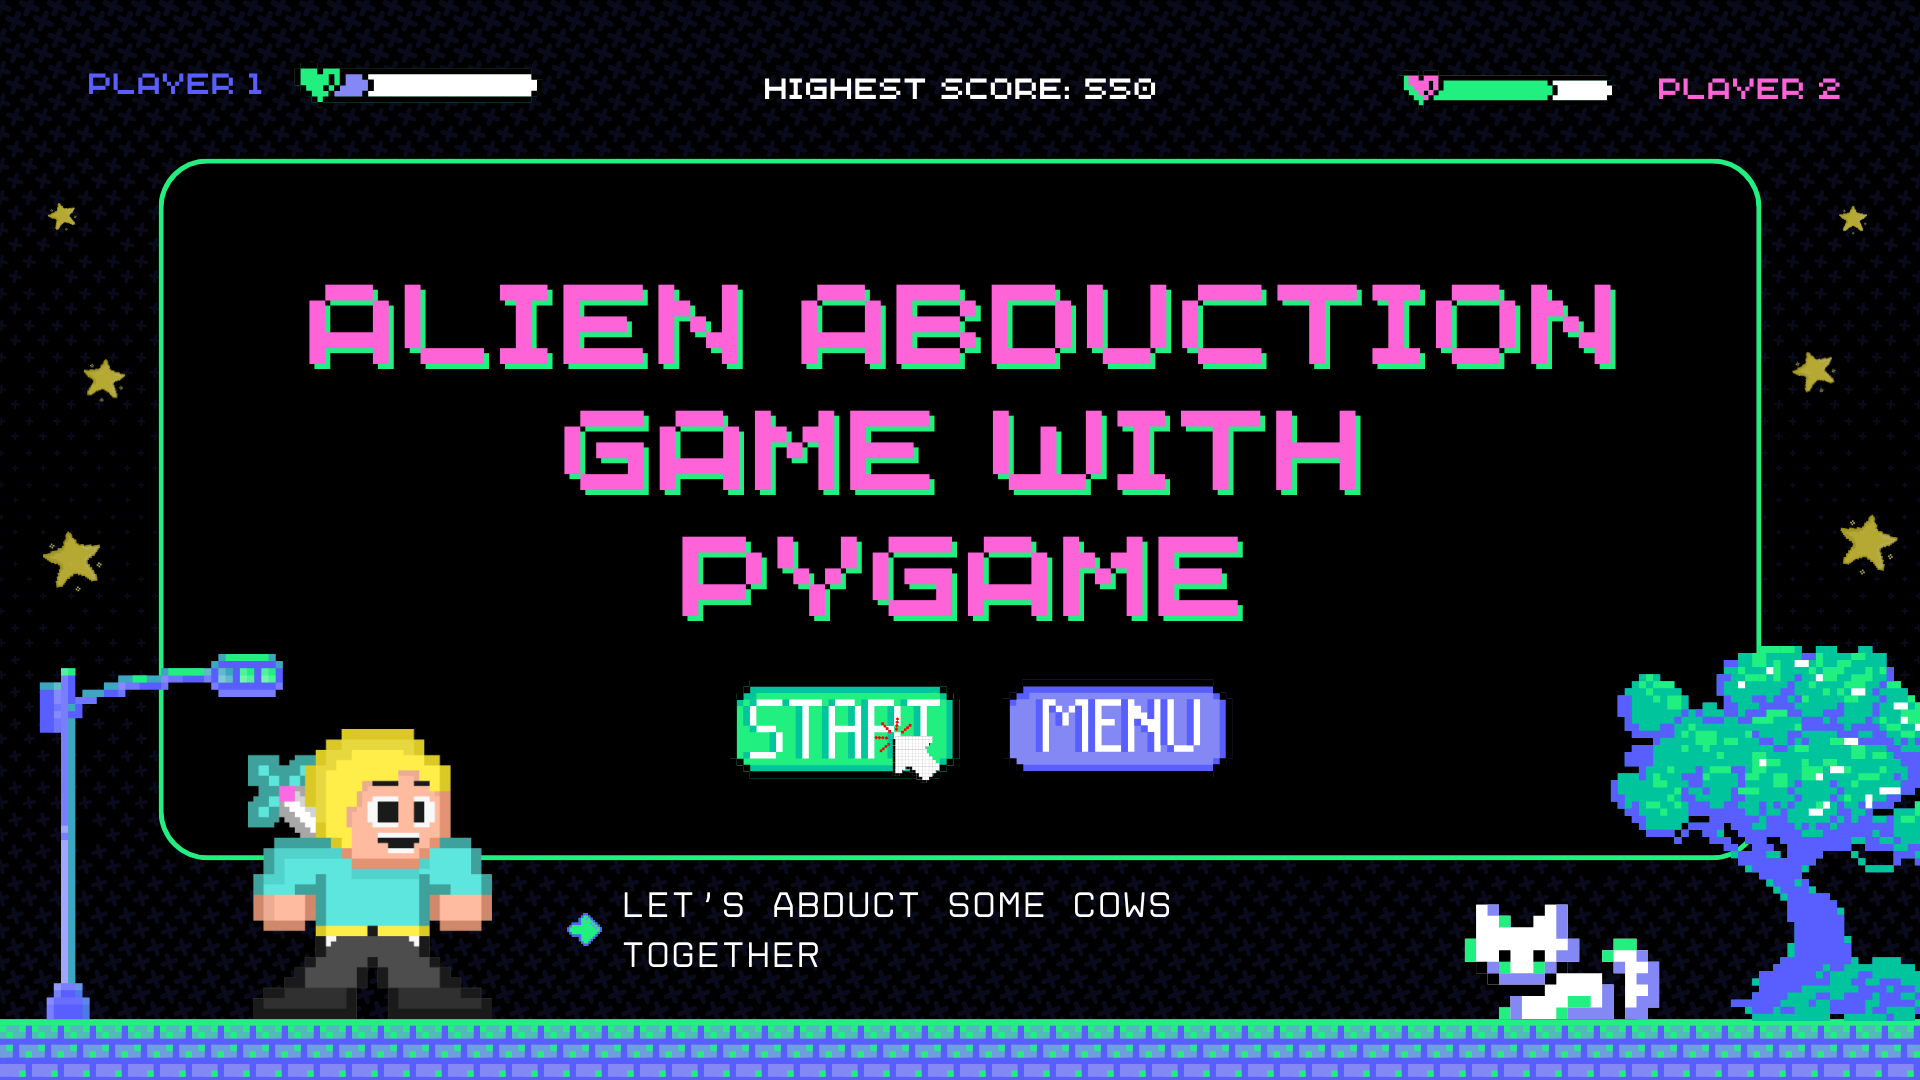 PyGame Tutorial – How to Build an Alien Abduction game